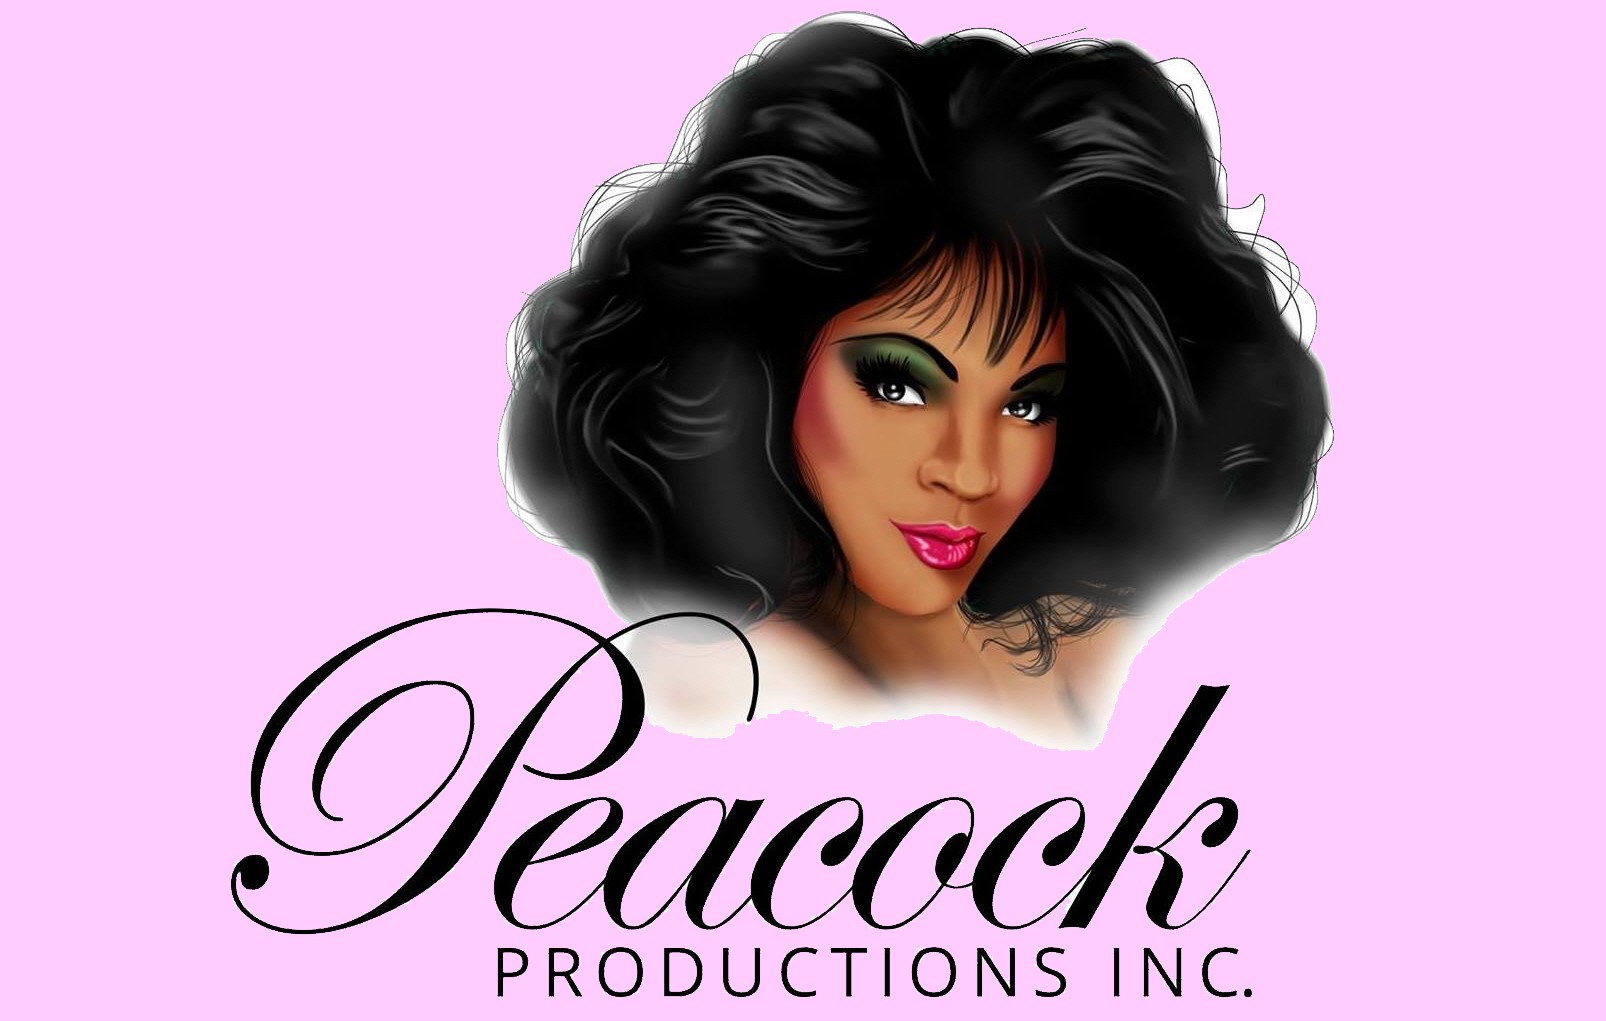 Peacock Productions